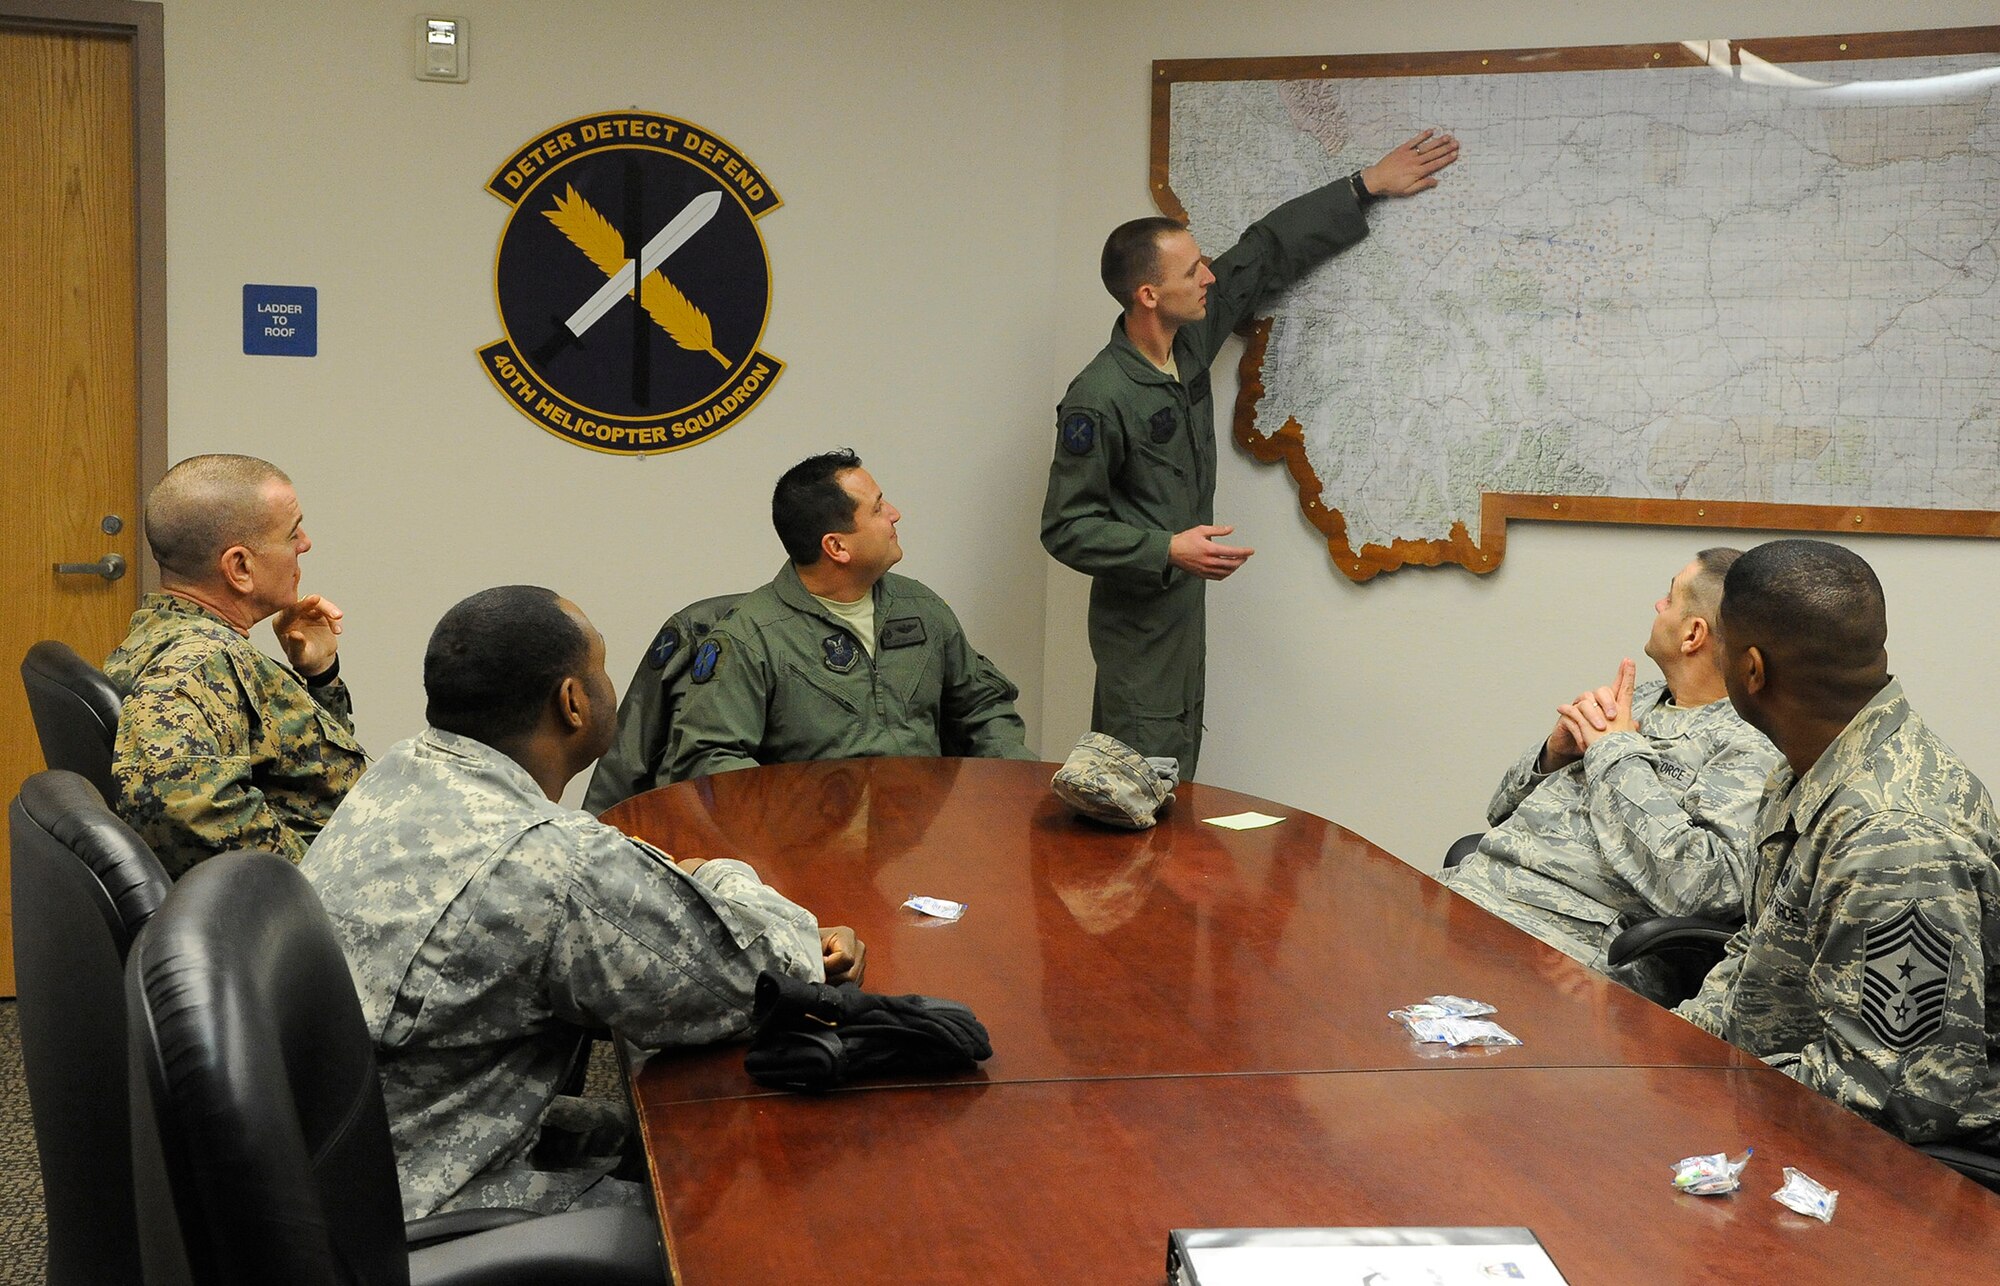 Staff. Sgt. Mike Frank, 40th Helicopter Squadron evaluator special mission aviator (standing), explains the size of the flight area within Malmstrom’s missile complex to Sgt. Maj. Bryan Battaglia, Senior Enlisted Advisor to the Chairman of the Joint Chiefs of Staff, and his colleagues at the helicopter squadron operations headquarters on Jan. 17. During the meeting, Battaglia was briefed on the 40th HS’s areas of responsibility as well as the capabilities of Malmstrom’s UH-1N Huey helicopters.  (U.S. Air Force photo/Airman 1st Class Collin Schmidt)